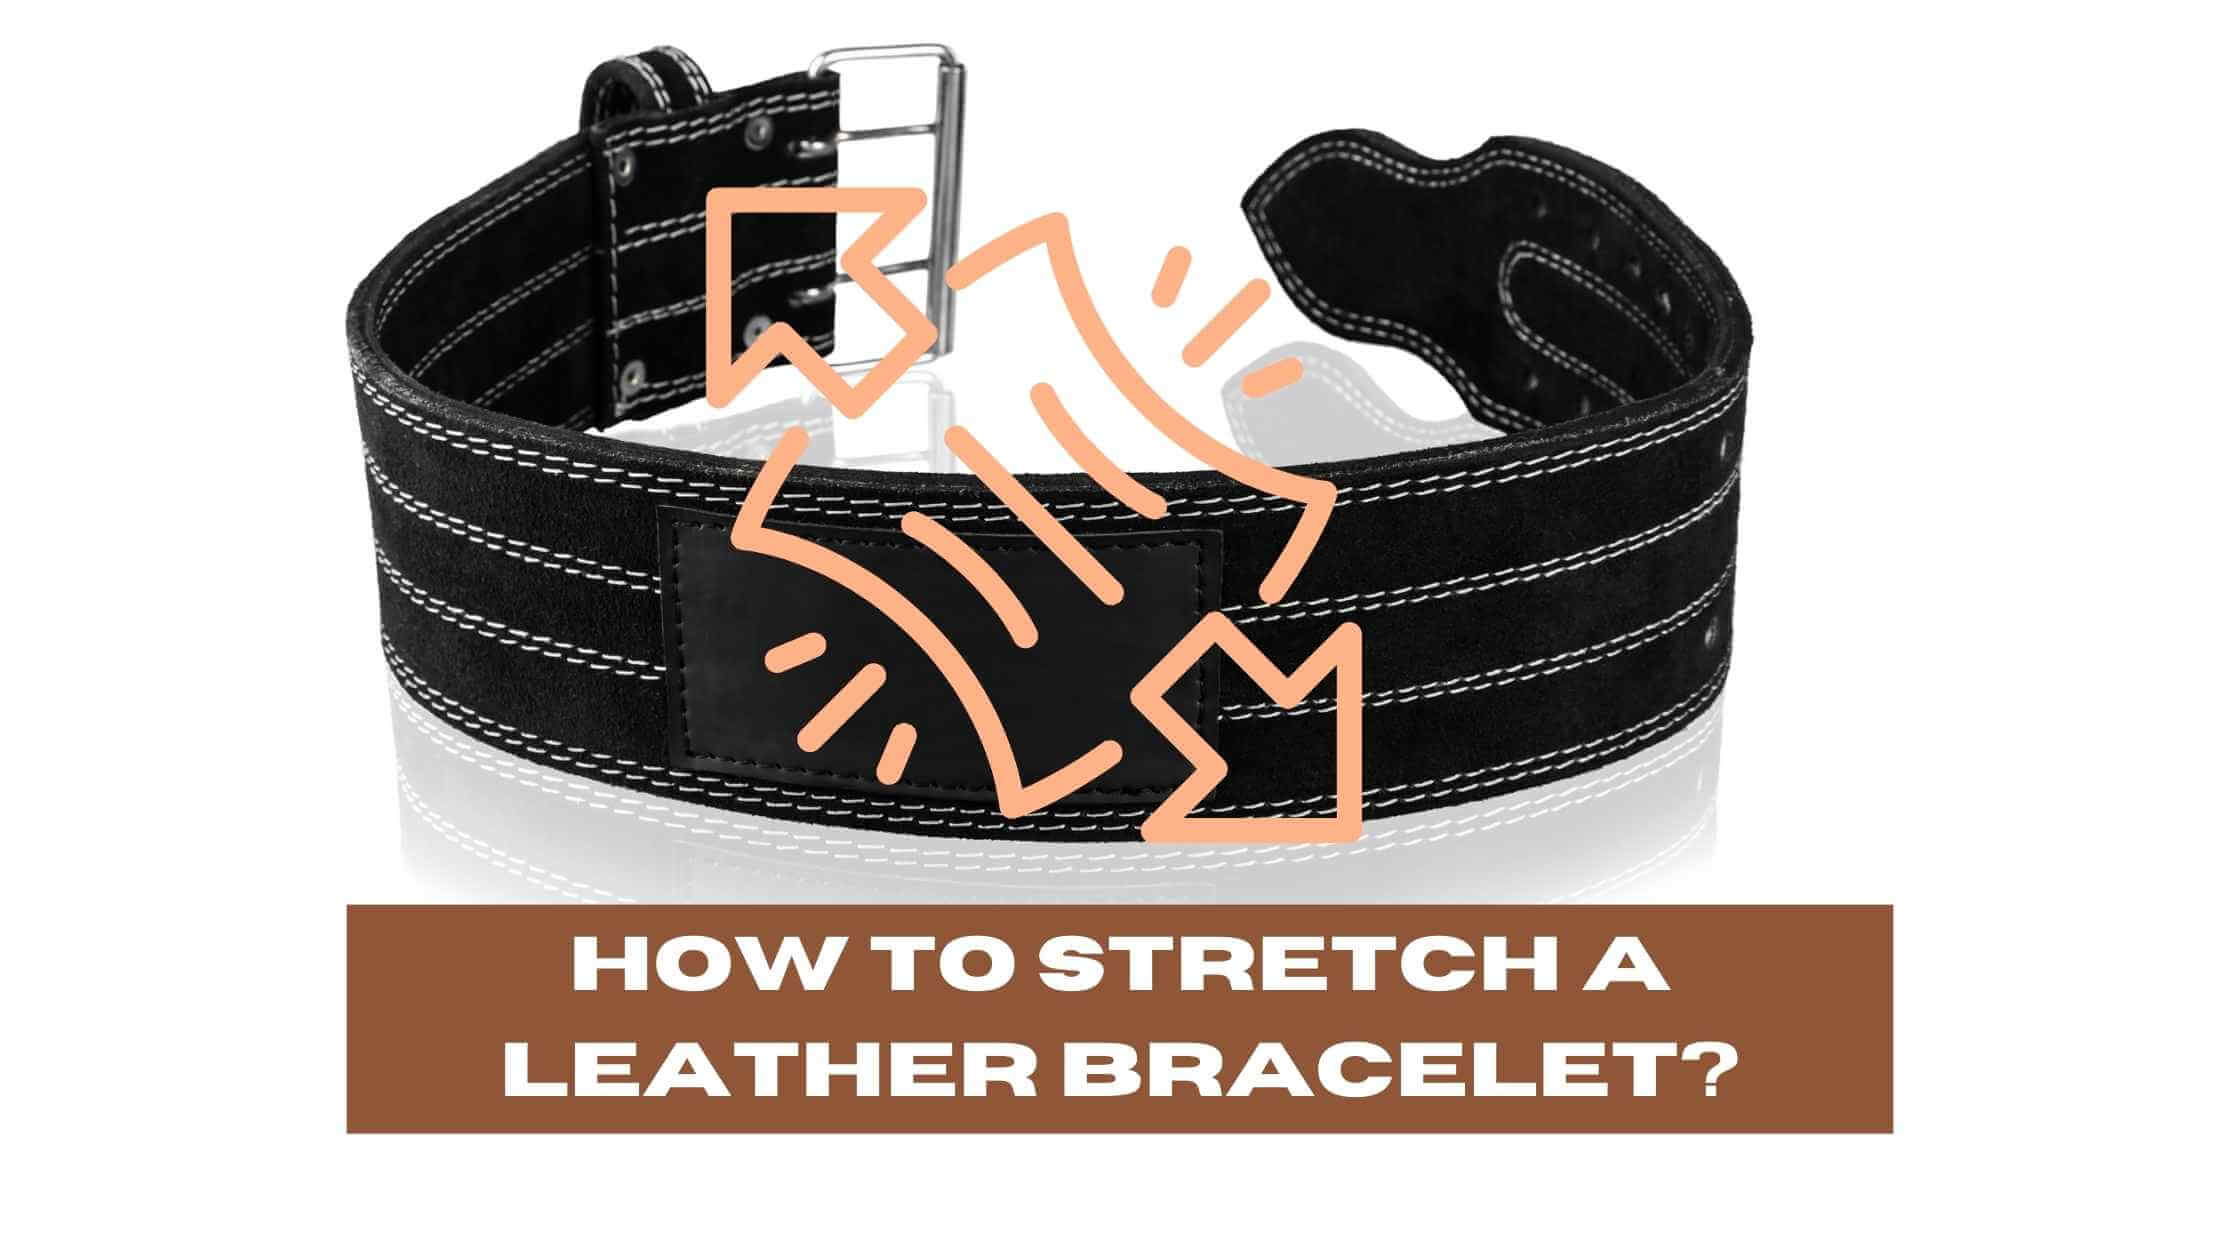 Black leather bracelet with a stretching sign above. How to Stretch a Leather Bracelet?